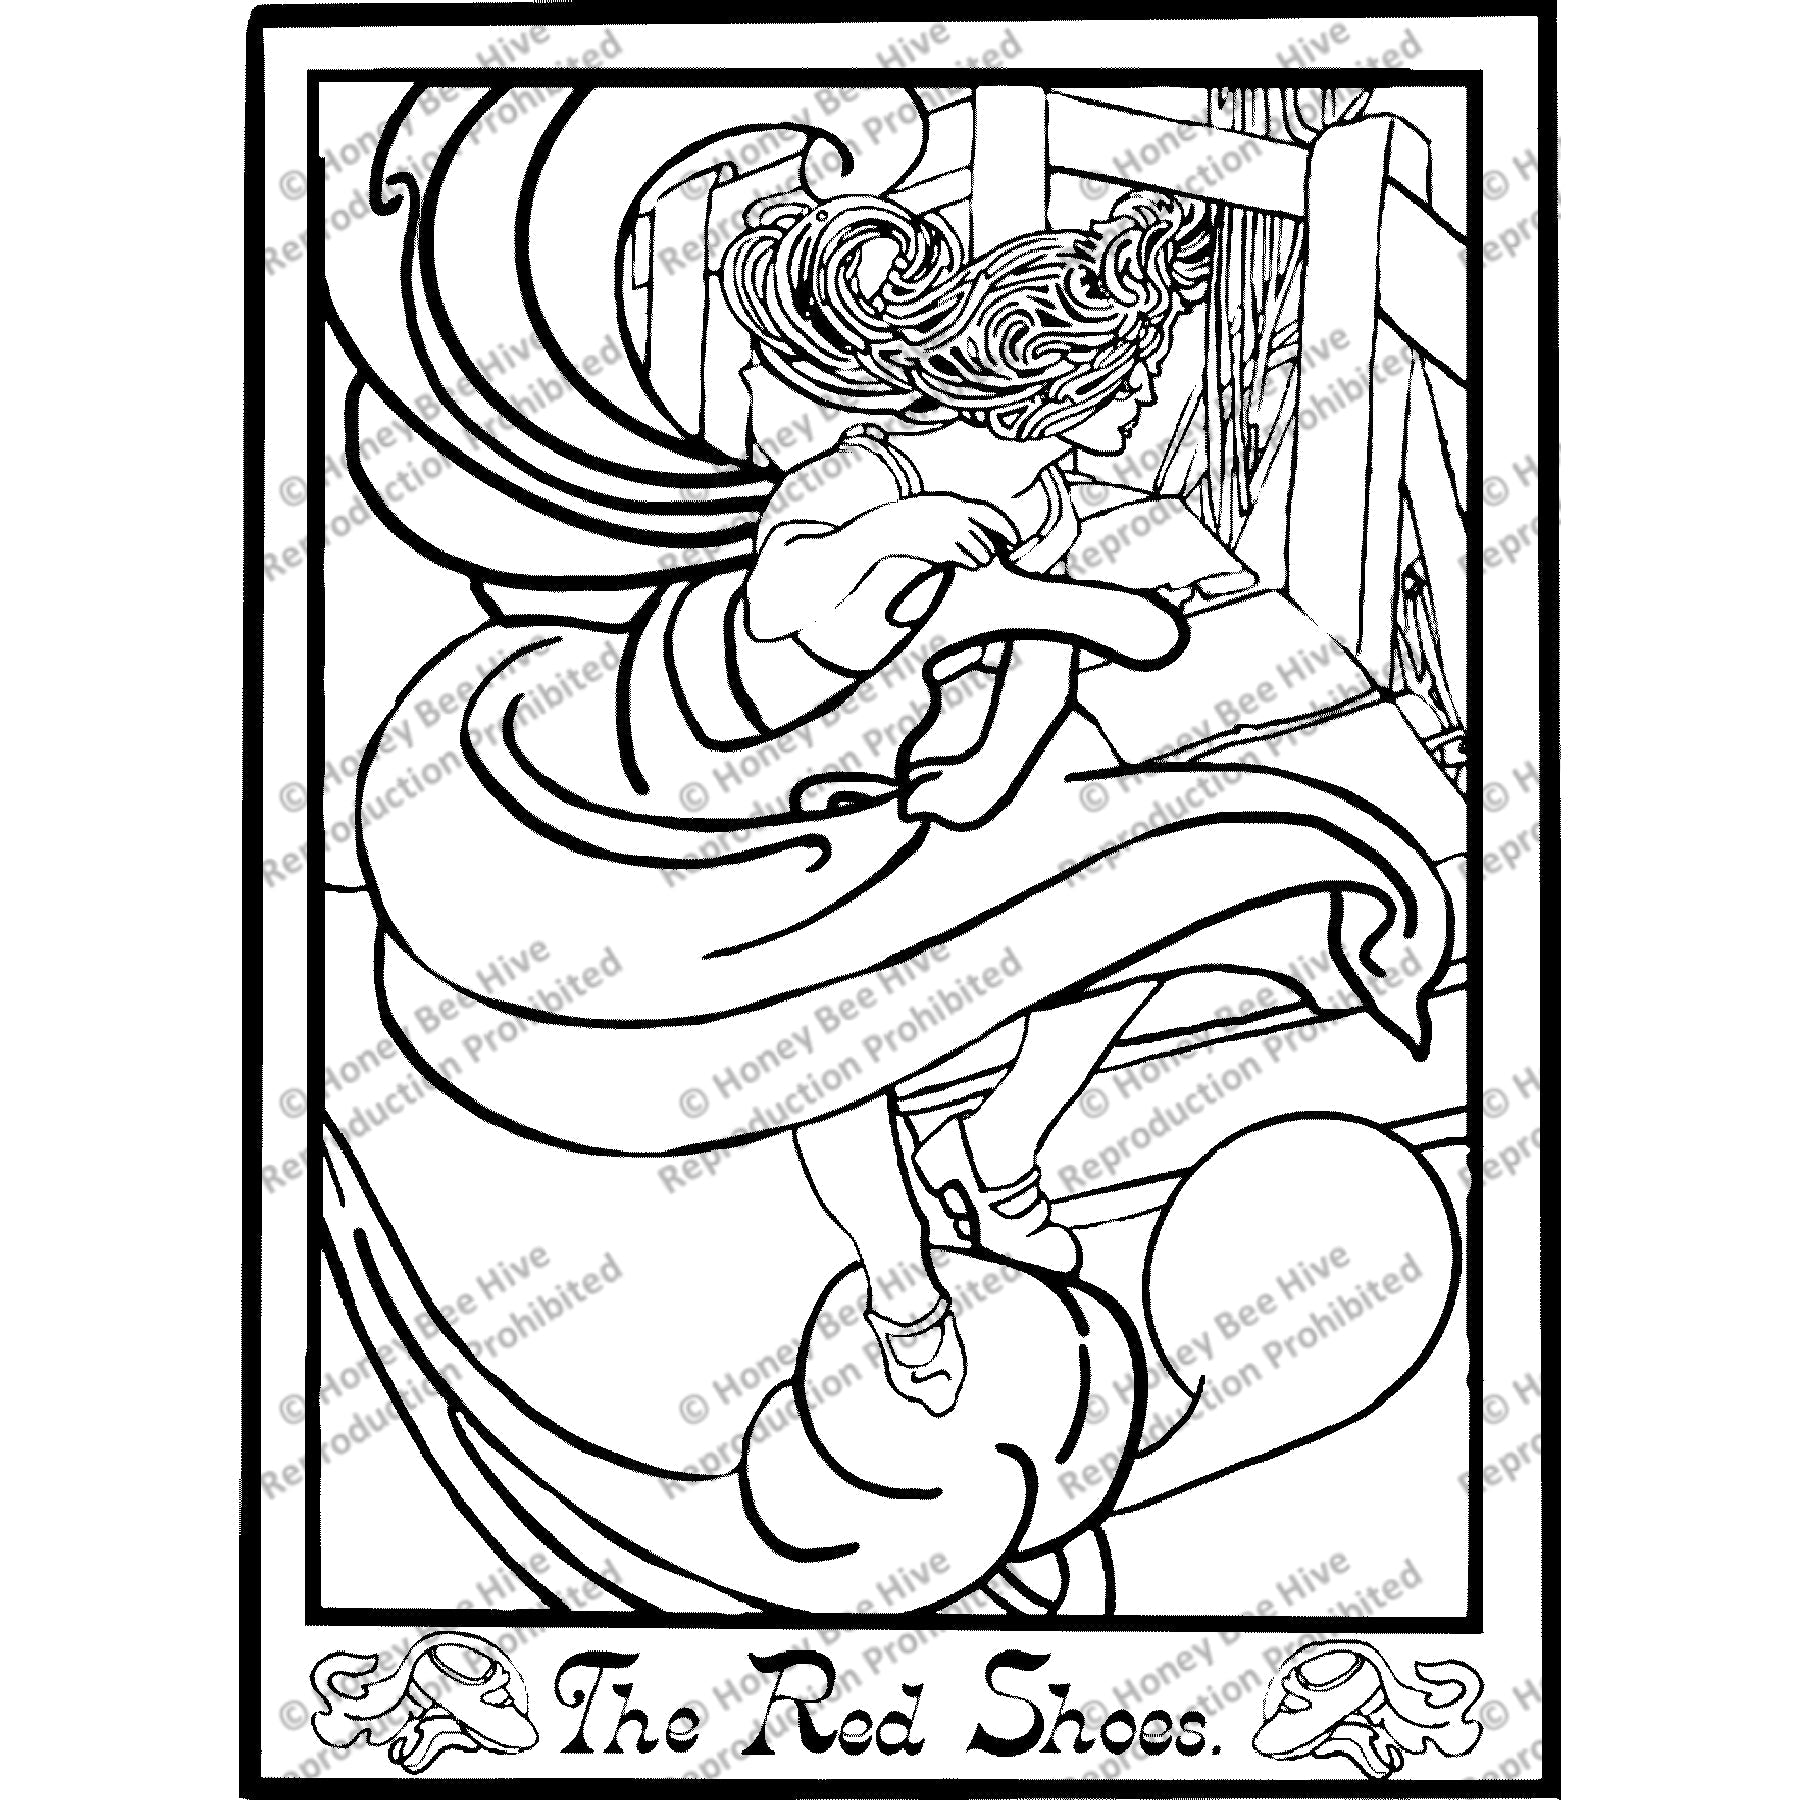 The Red Shoes Fairy Tales, ill. Charles Roninson, 1899, rug hooking pattern